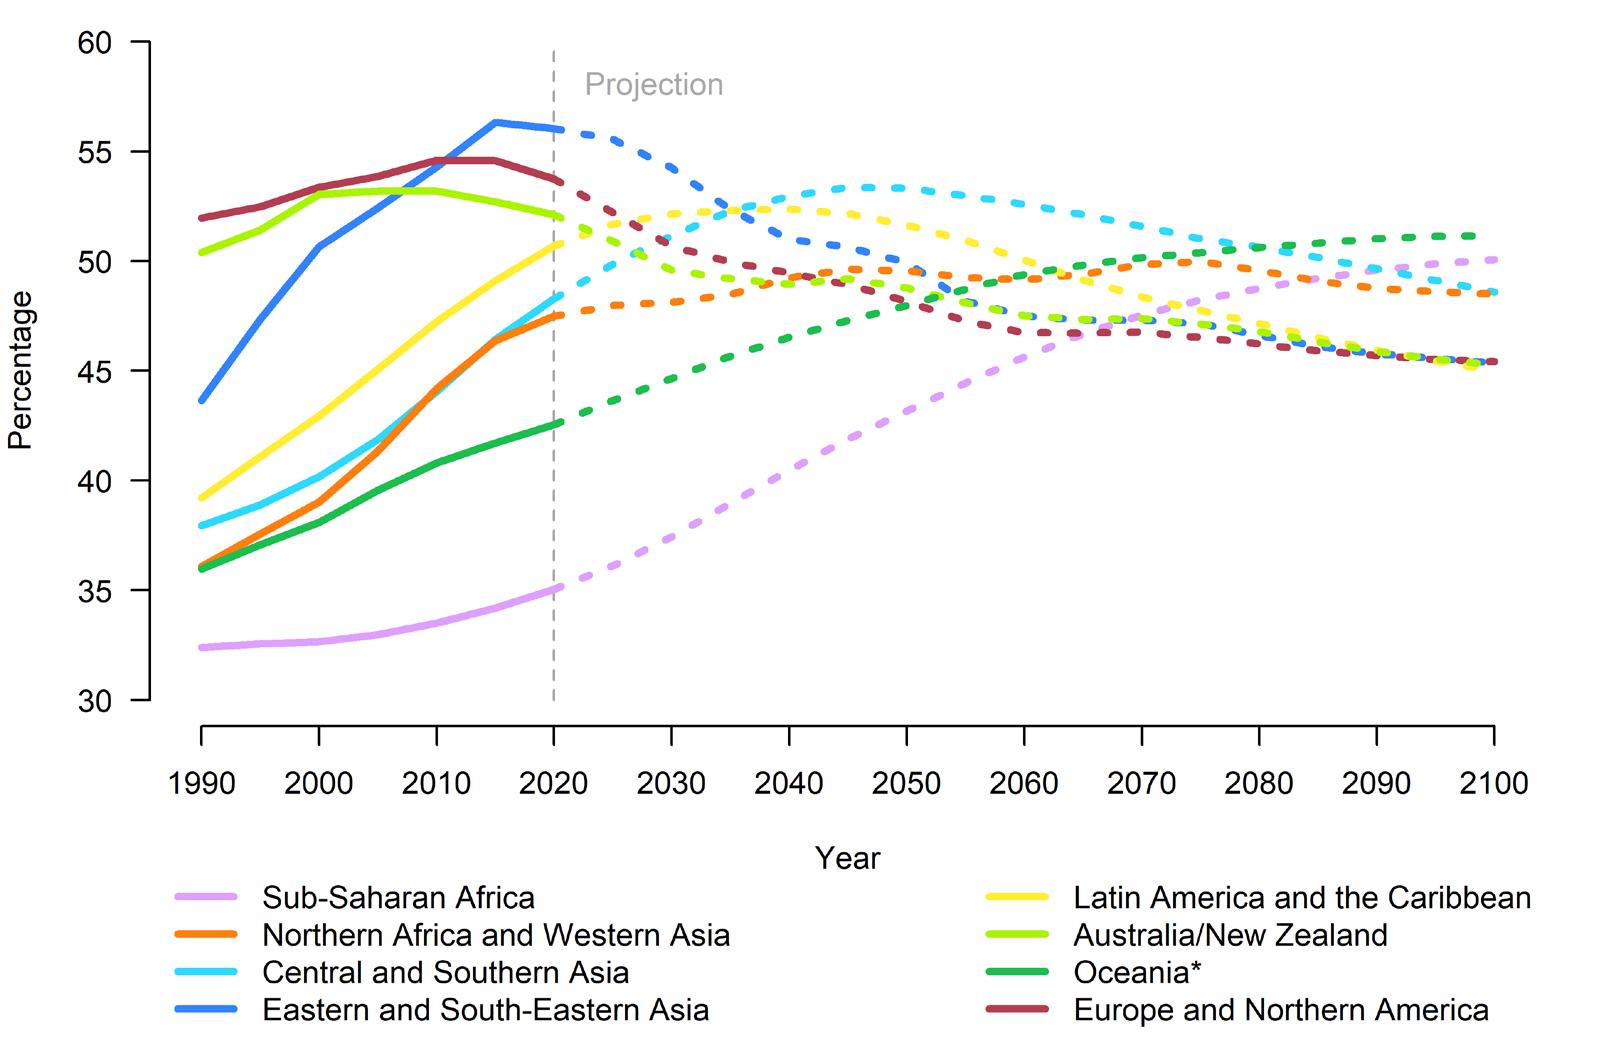 This diagram shows the percentage of people aged 25-64 (vertical axis) for the years 1990-2100 (horizontal axis). Data after 2019 are projections. In Eastern and South-Eastern Asia, the percentage in 2020 was 56 and was projected to fall after 2020; in Europe and Northern America, 53% and falling; in Australia and New Zealand, 52% and falling; 50% and rising for Latin and America and the Caribbean; 47.5% and rising for Central and Southern Asia; 47% and rising for Northern Africa and Western Asia; 42% and rising slightly for Oceania (excluding Australia and New Zealand); and finally, 34% and rising for Sub-Saharan Africa.